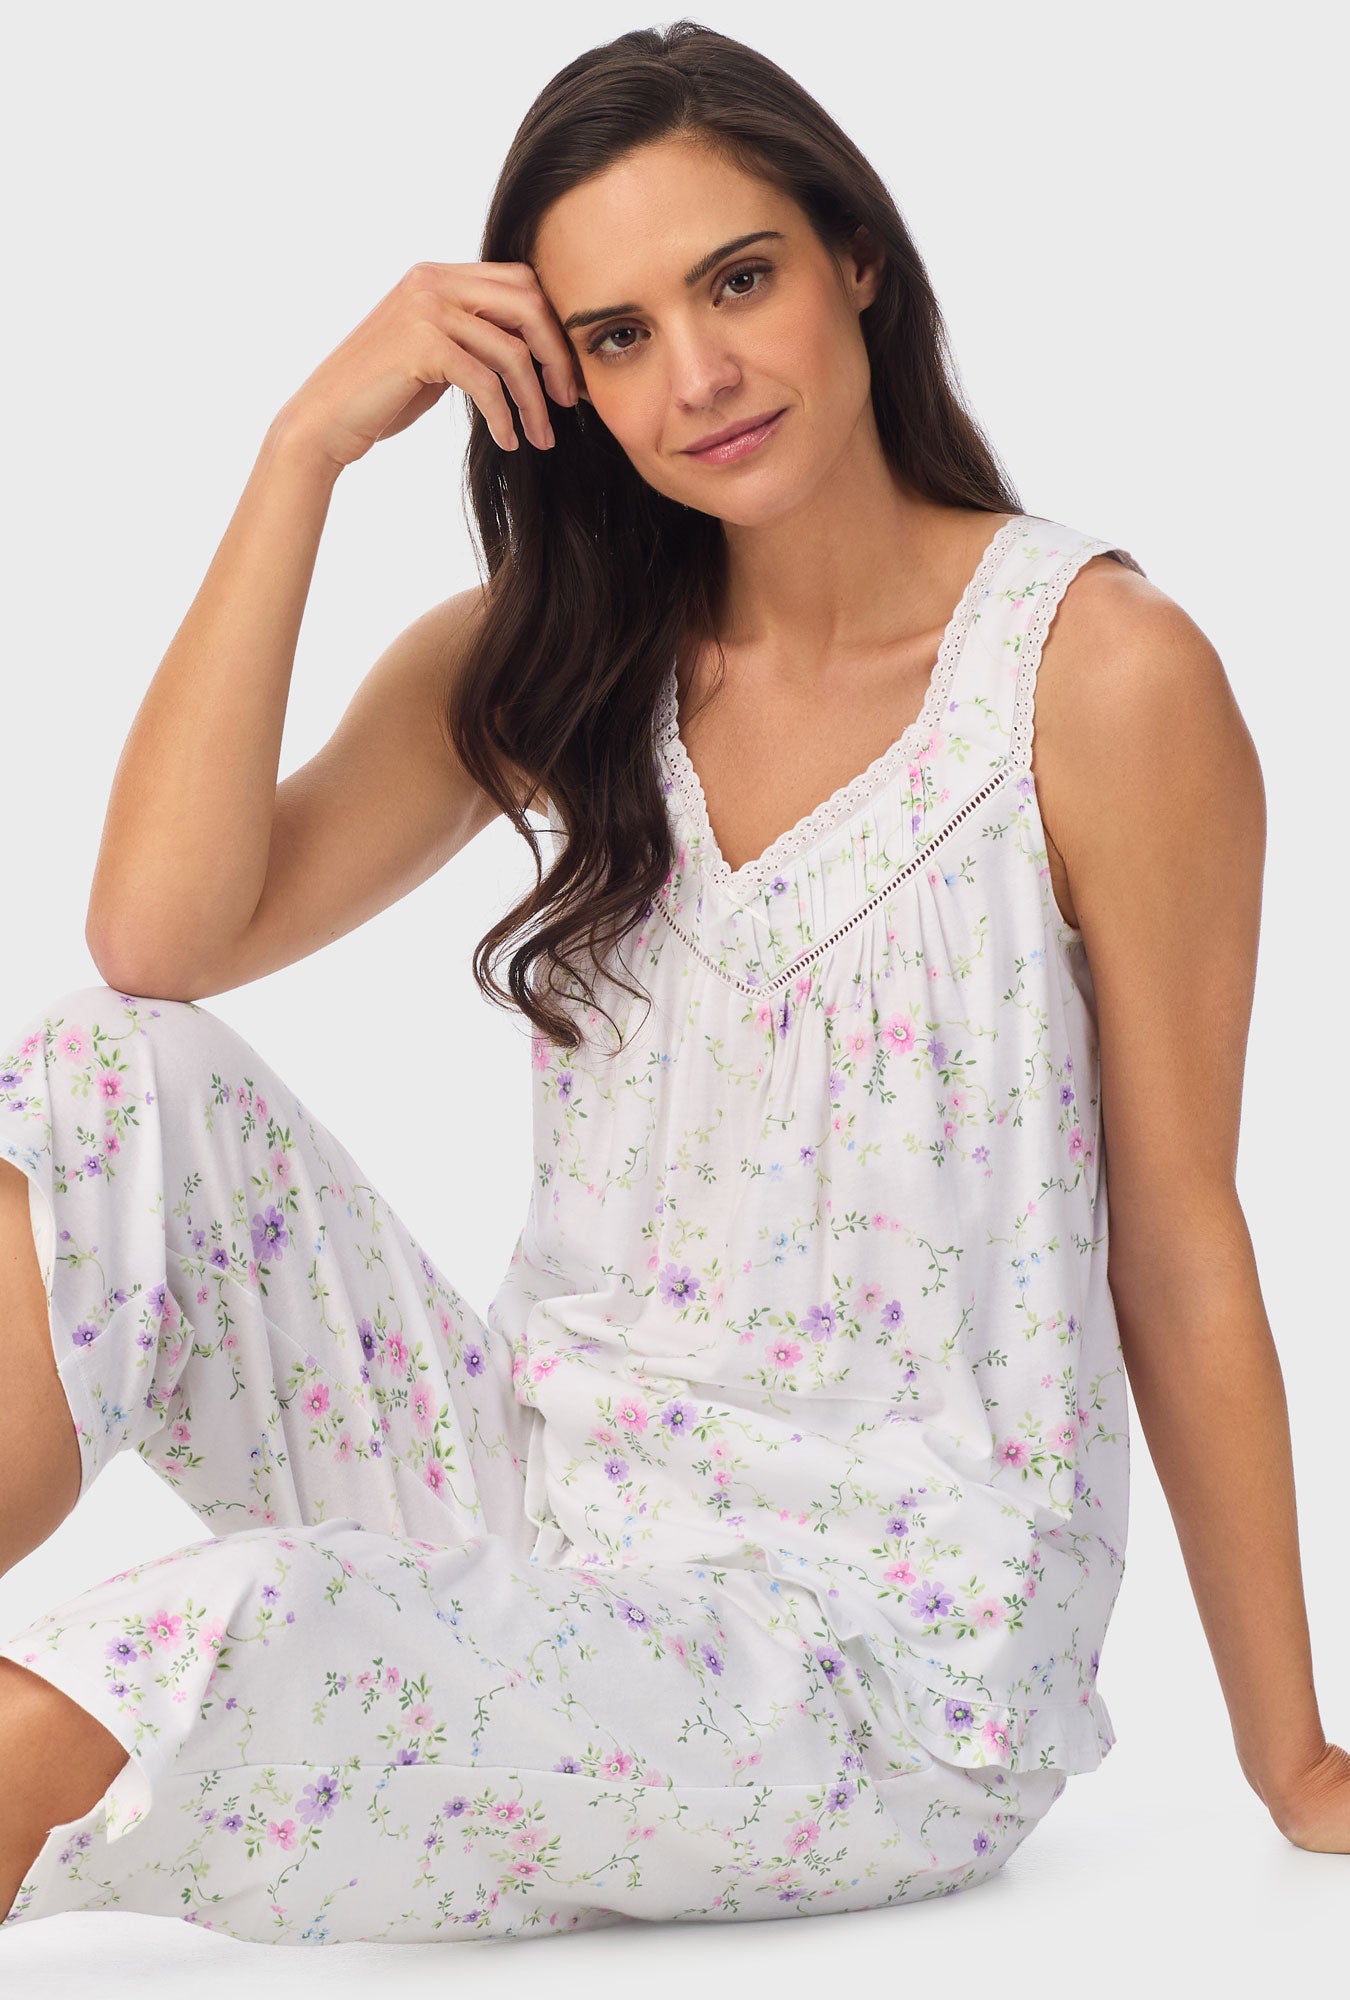 A lady wearing white sleeveless Viney Floral Sleeveless Capri Pant PJ Set with Lilac and Cherry Blossom print